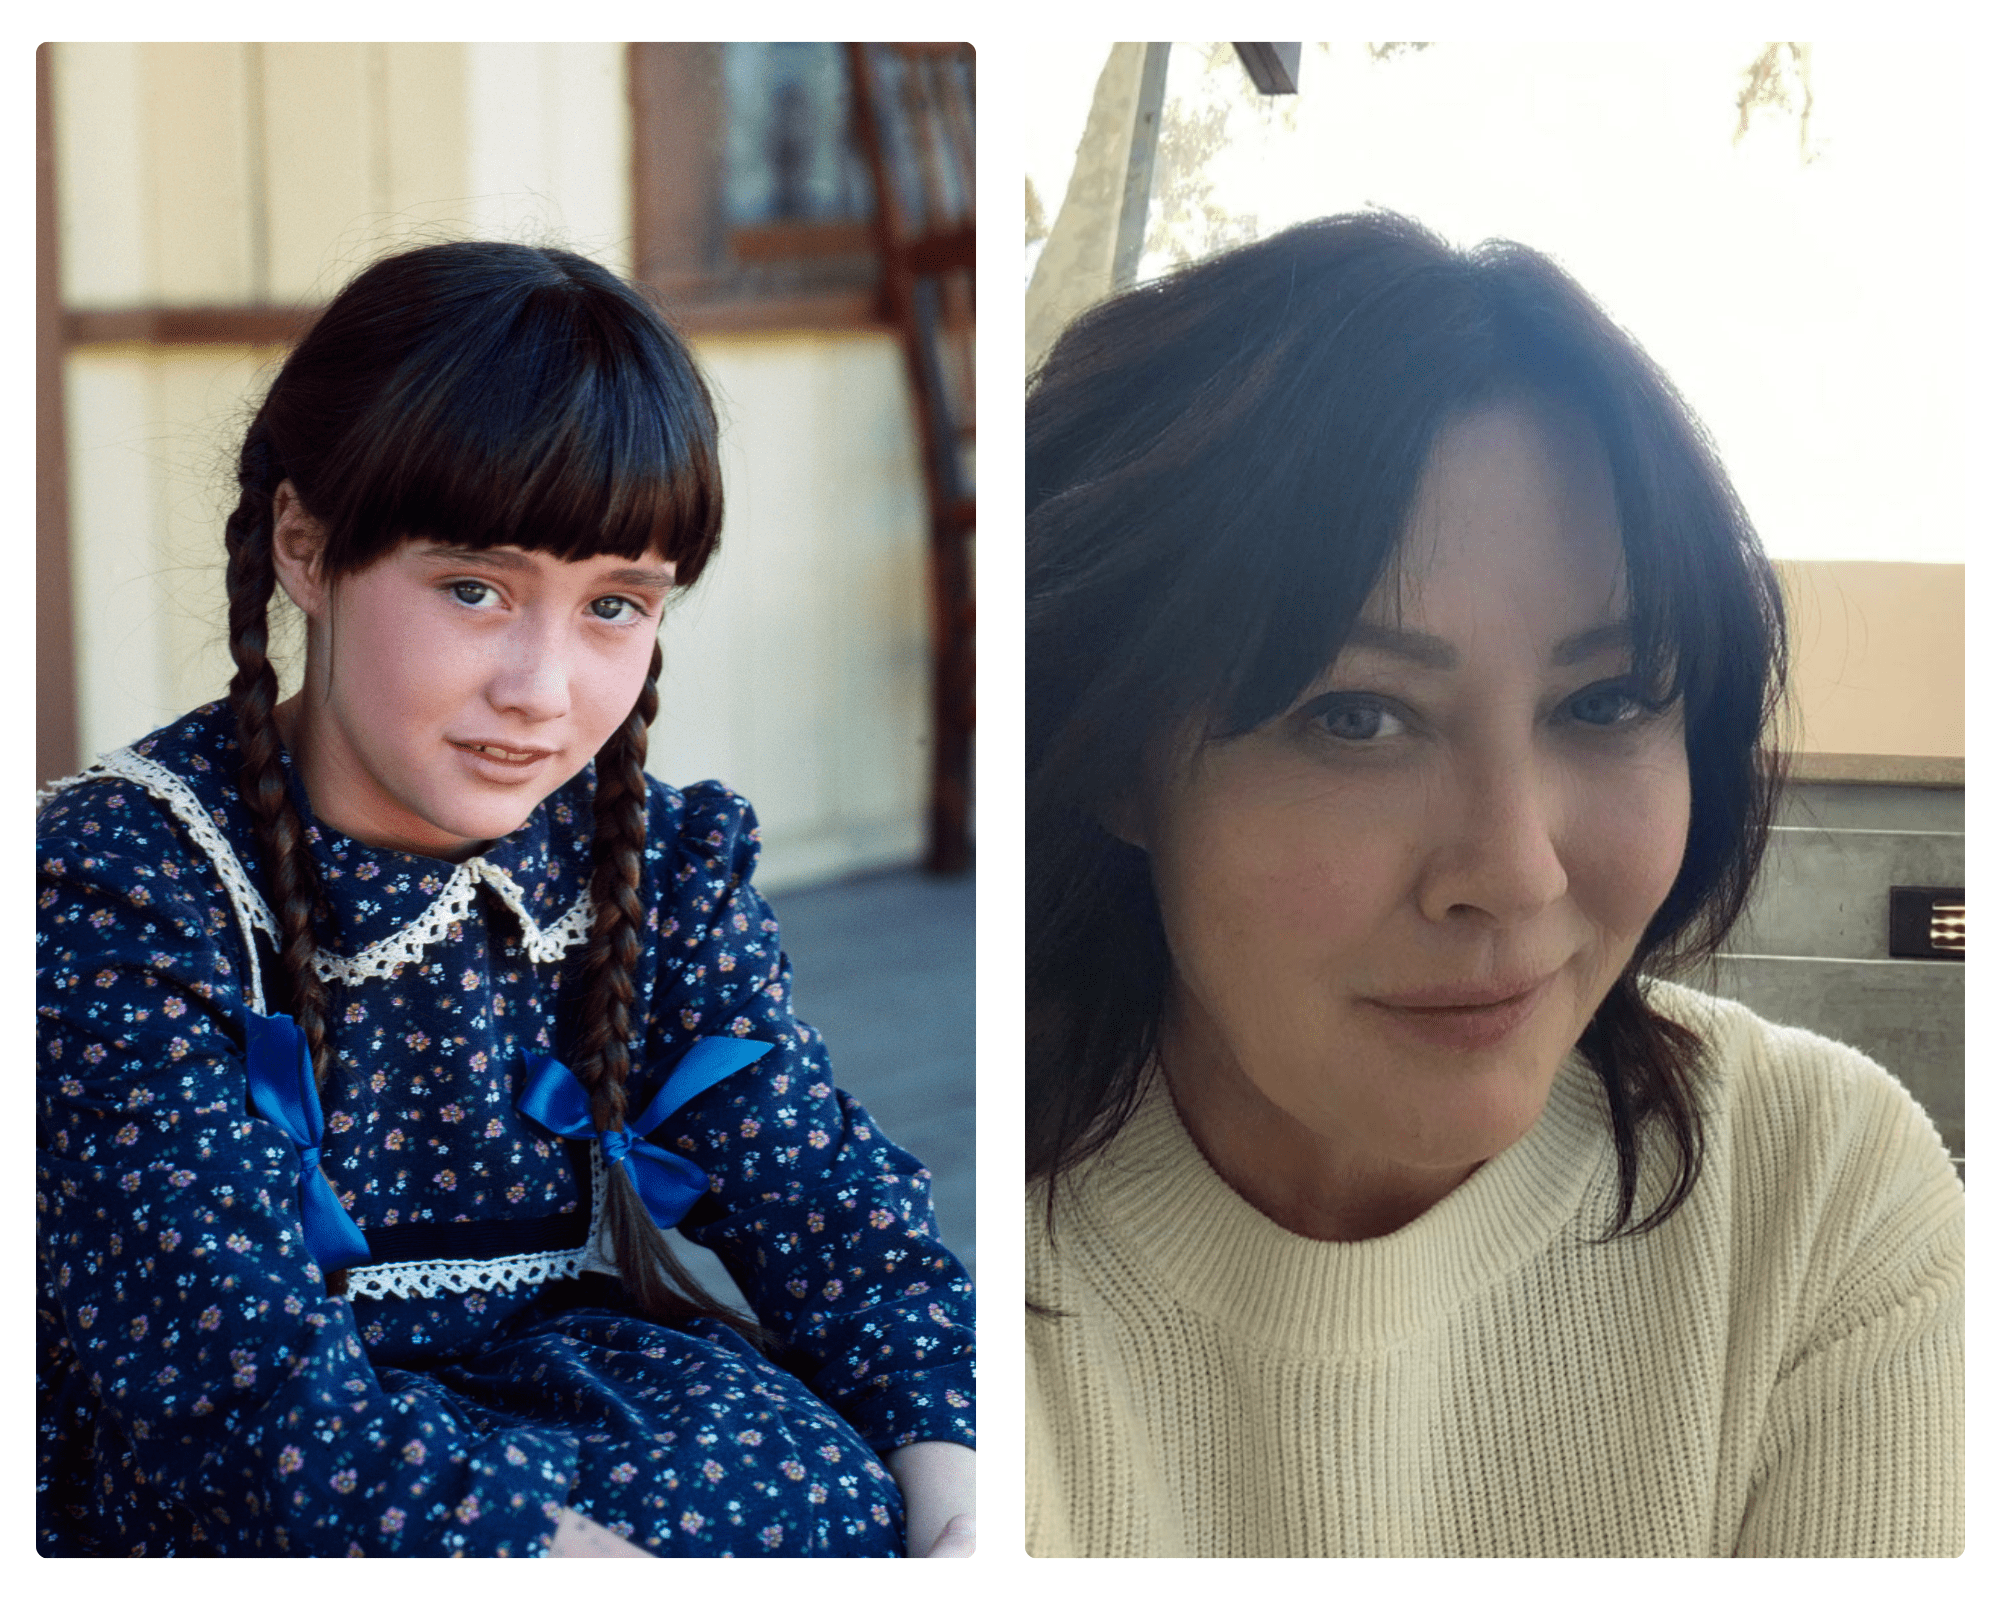 Shannen Doherty | Source: Getty Images/Instagram.com/Shannen Doherty